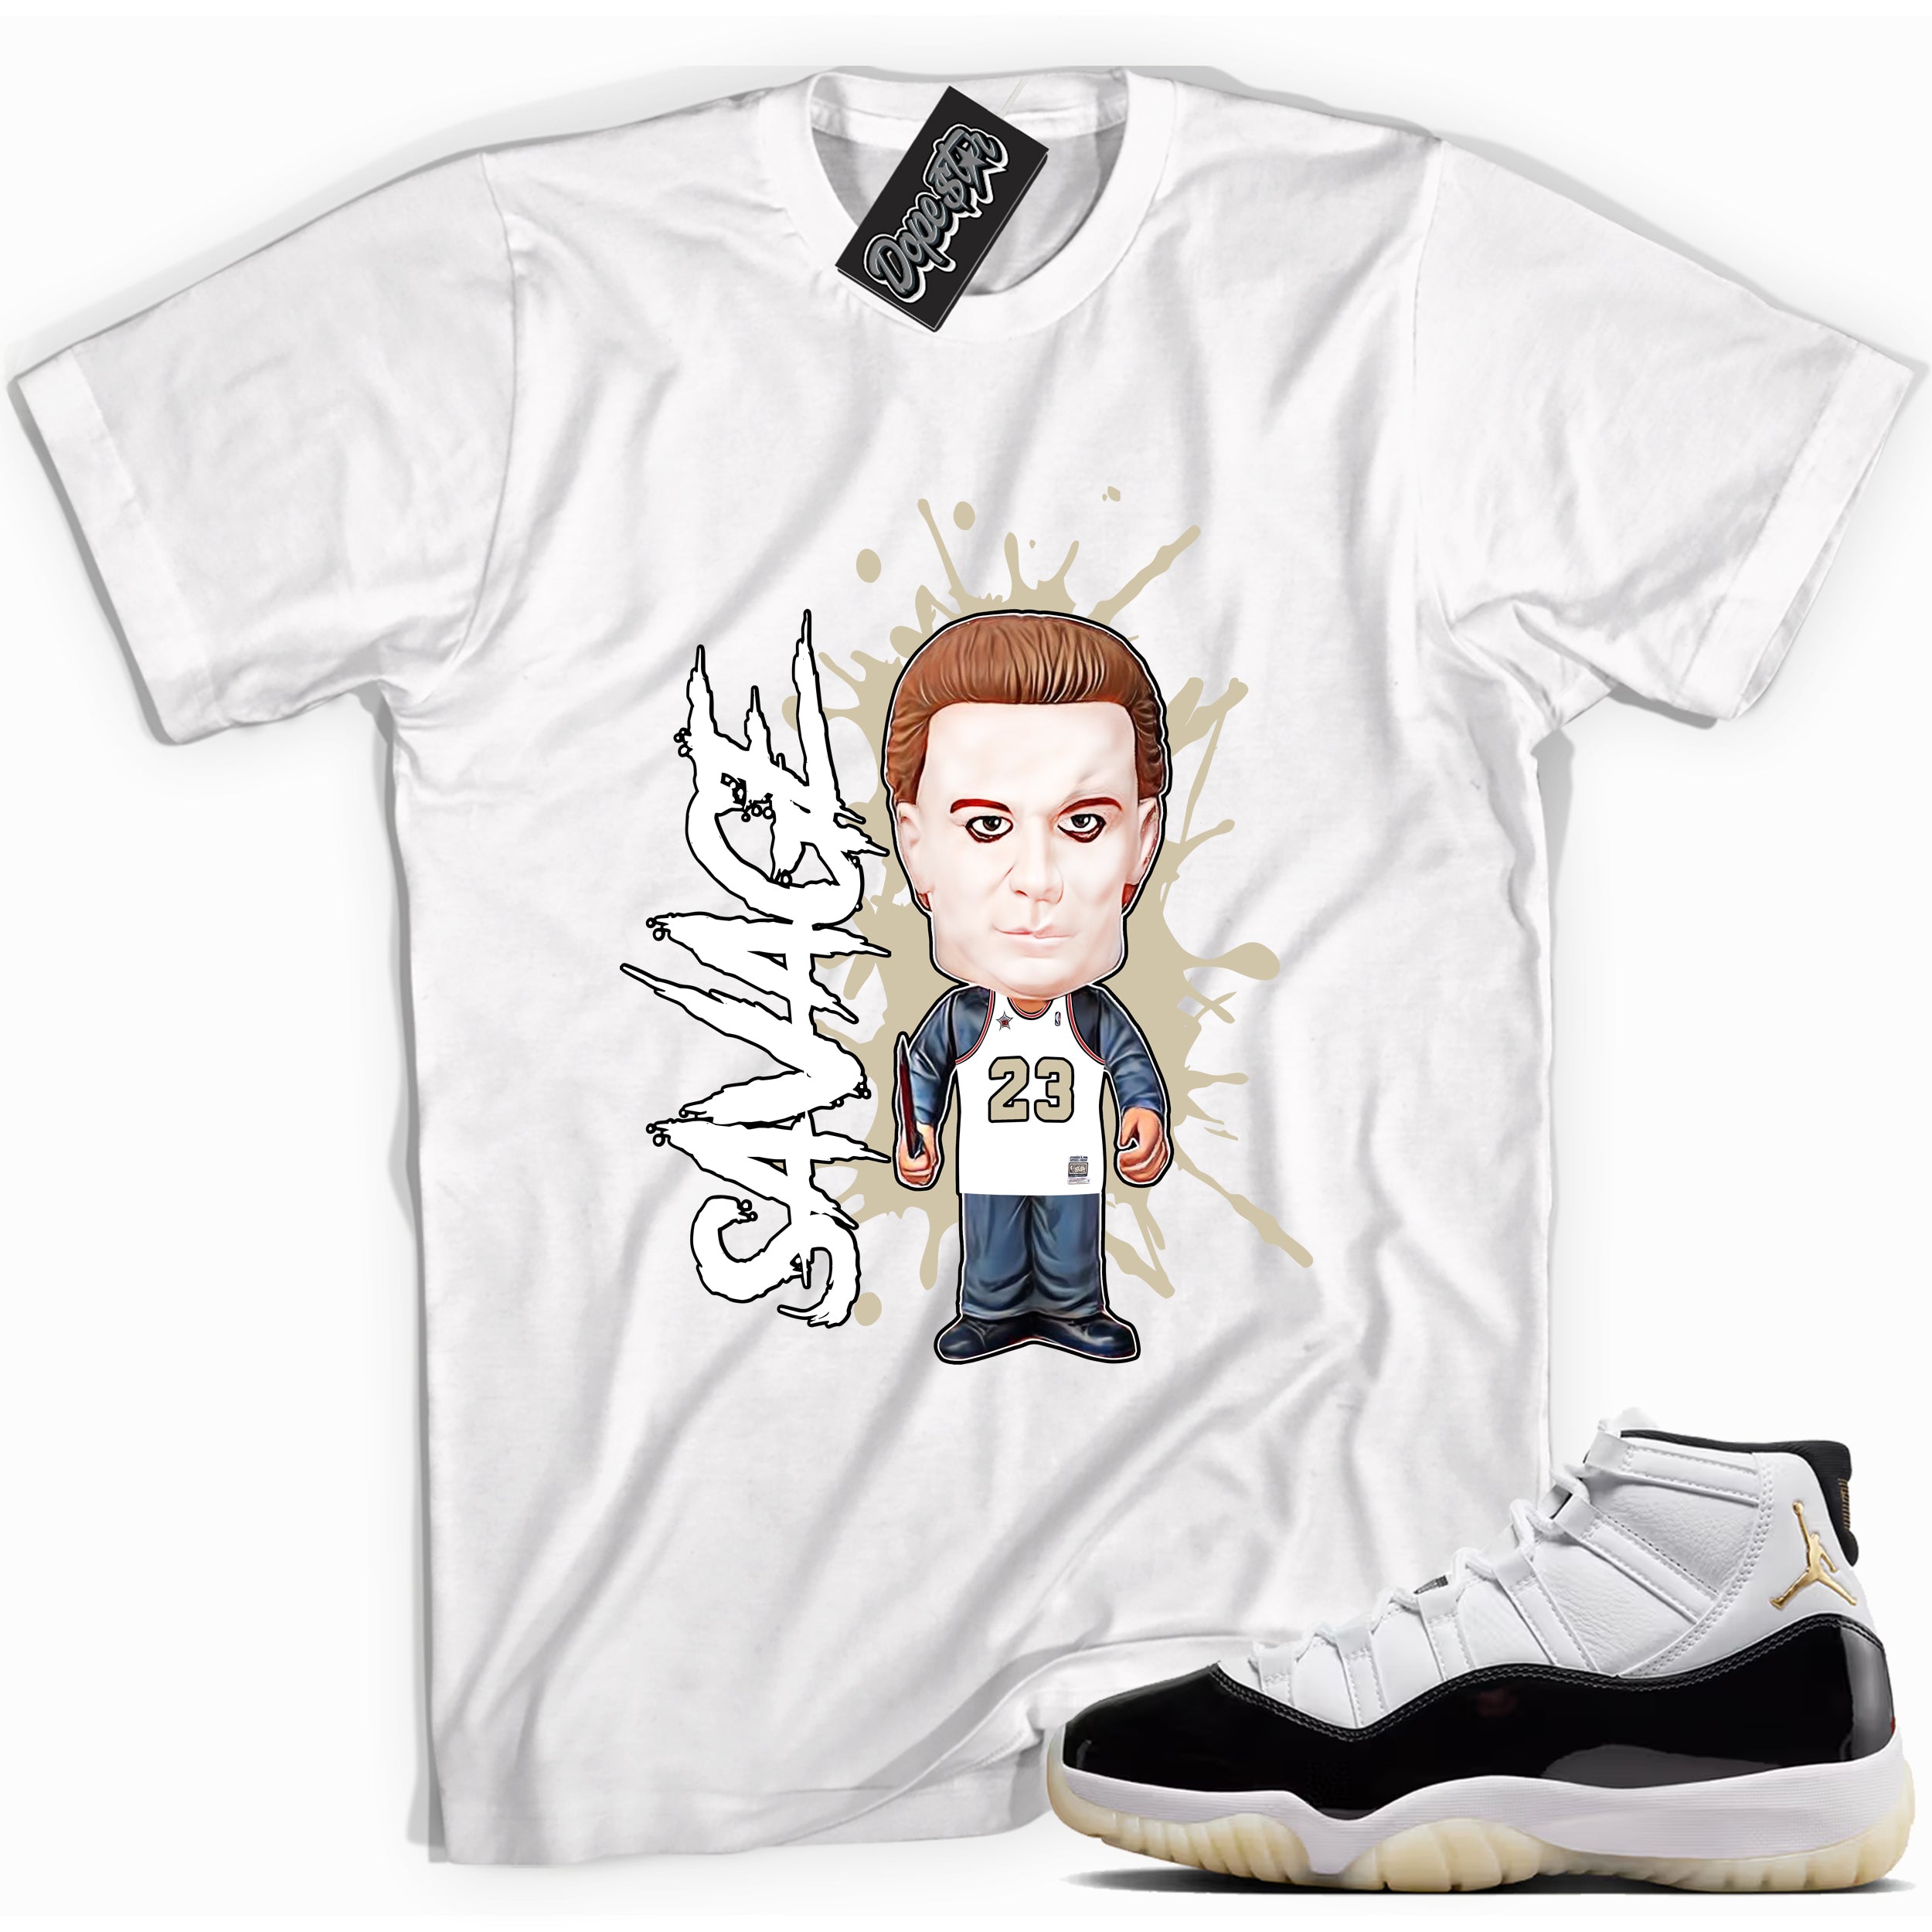 Cool White graphic tee with “ Savage ” print, that perfectly matches AIR JORDAN 11 GRATITUDE   sneakers 